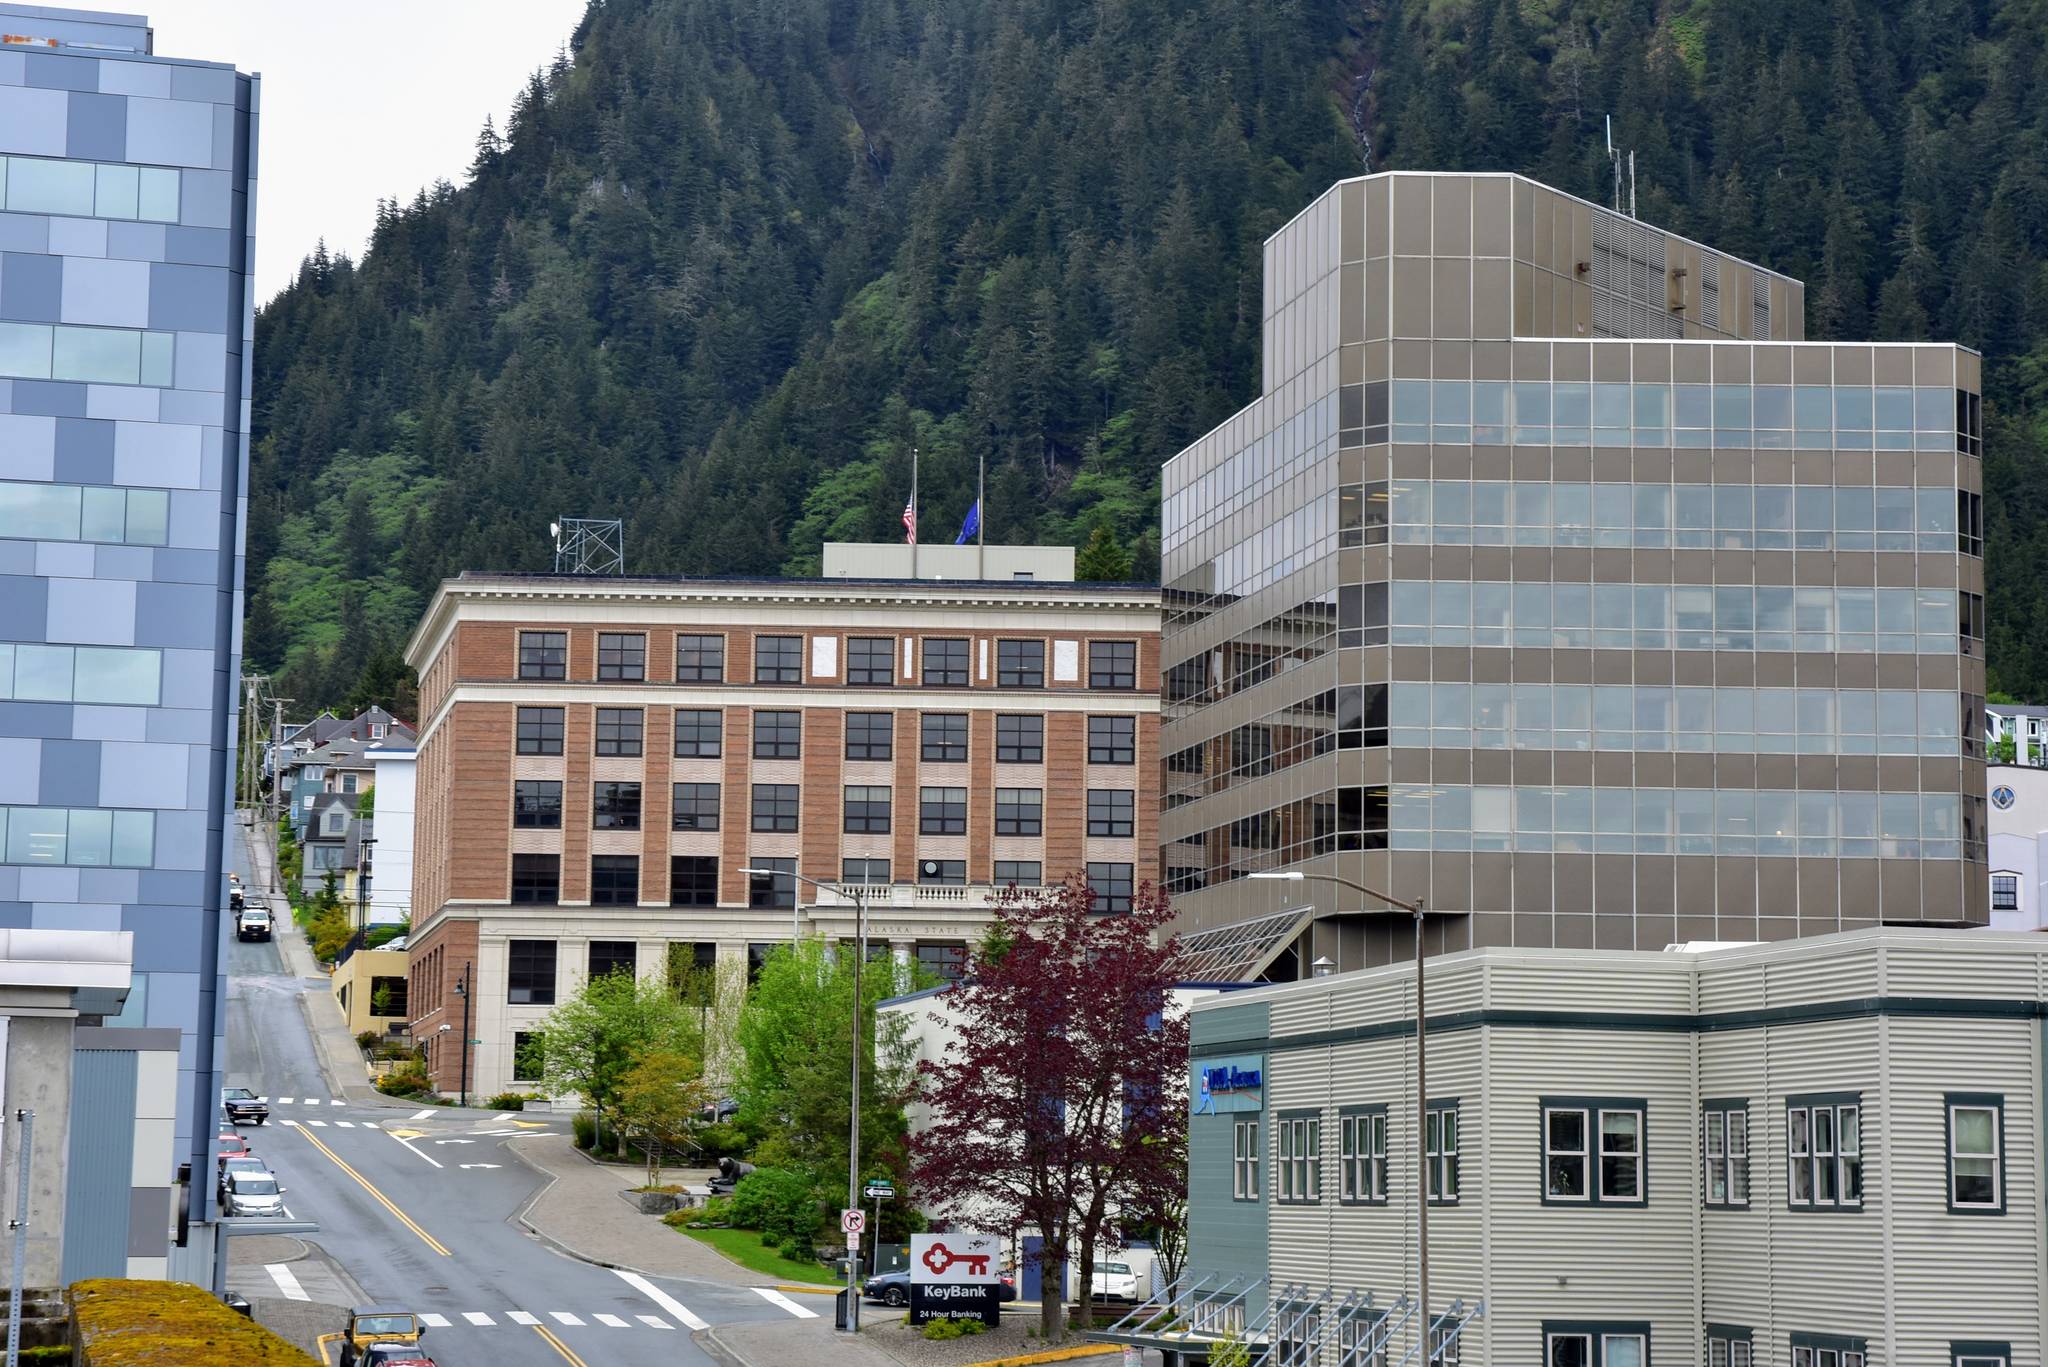 The Alaska State Capitol was quiet on Friday, May 28, 2021, as several lawmakers returned to their home districts for the Memorial Day weekend. Negotiations on the state’s budget won’t begin again until Tuesday, June 1. (Peter Segall / Juneau Empire)